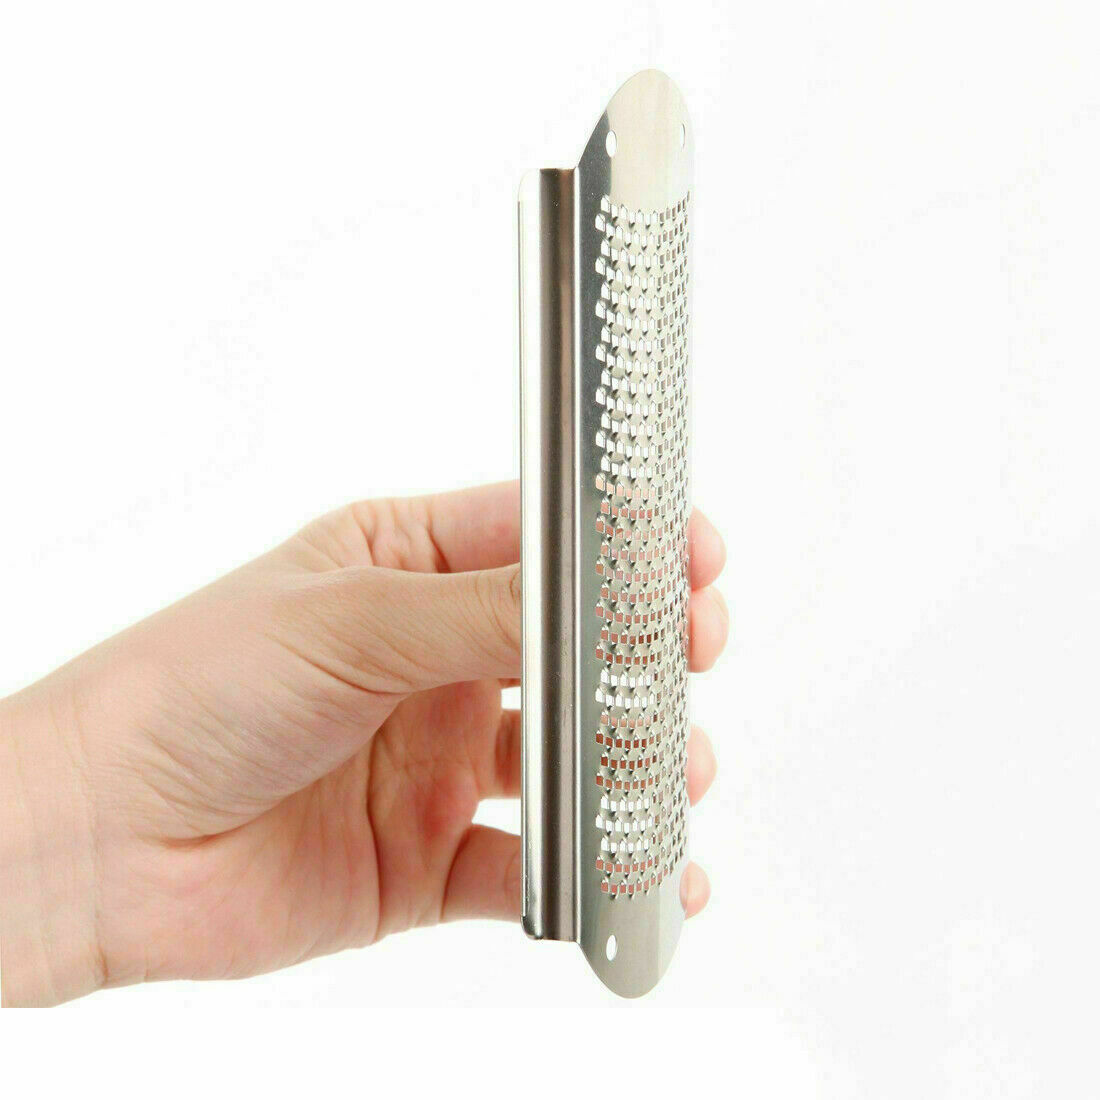 Pro 2 In1 Foot Callus Remover File Rasp Scraper Cracked Pedicure Rough Tool Colossal Foot Scrubber Foot File Foot Rasp Callus Remover Stainless Steel Foot Grater Foot Care Pedicure Tools